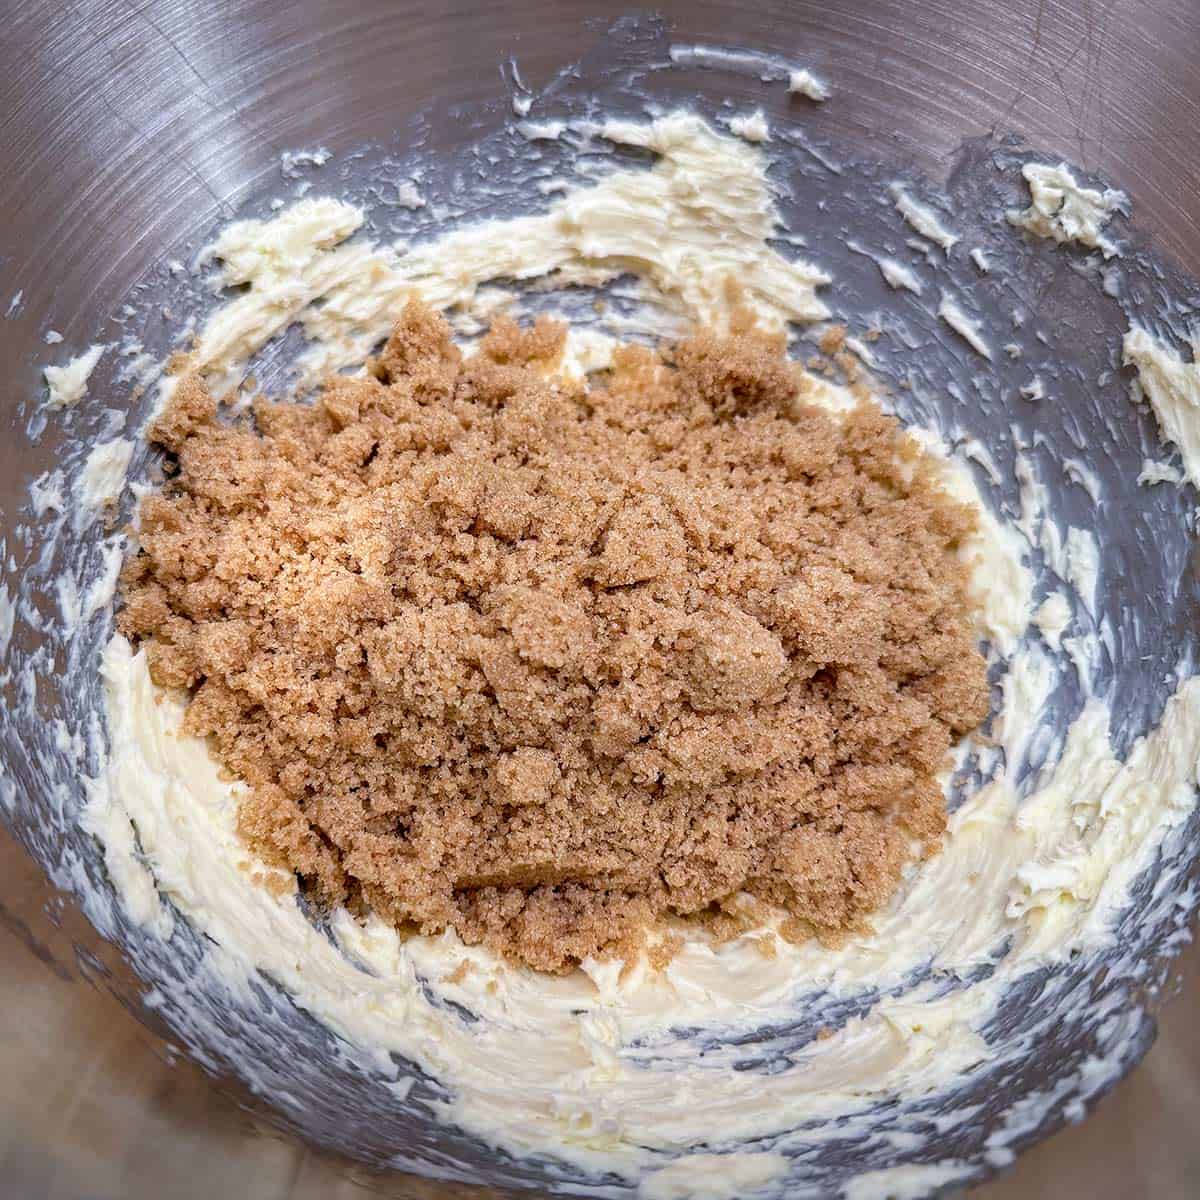 The butter is creamed and now adding the brown sugar.